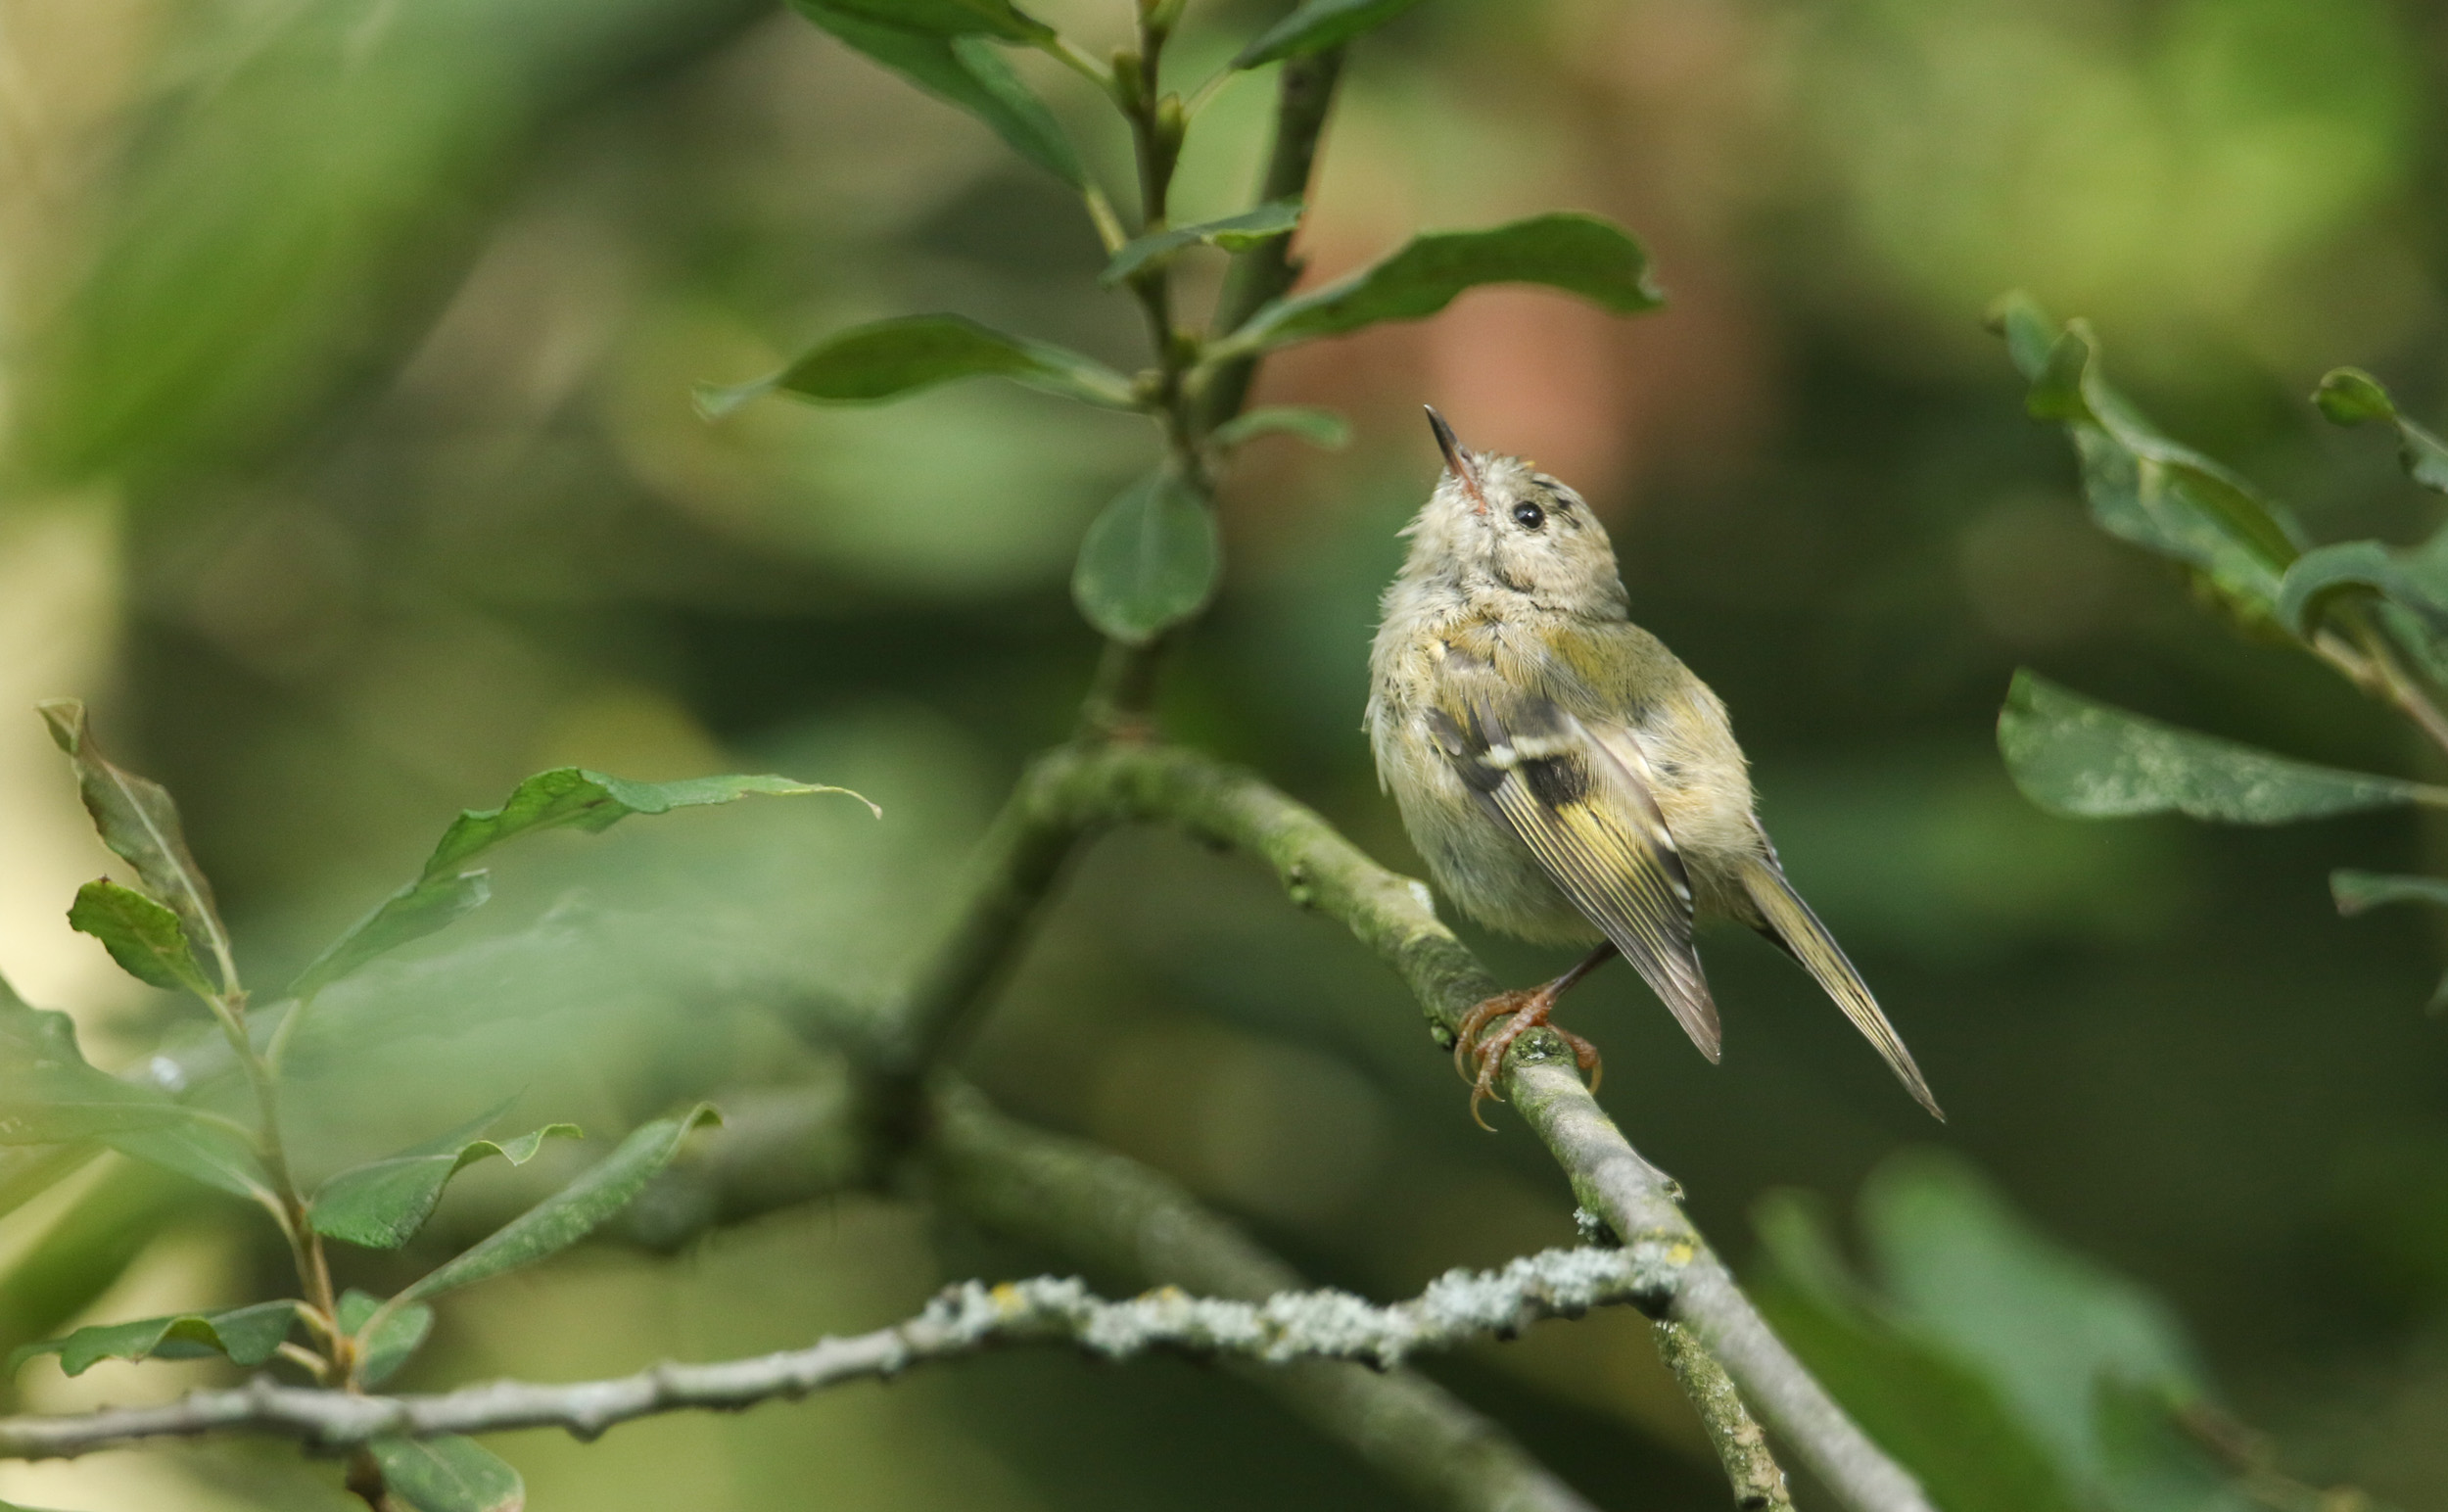 A juvenile Goldcrest perched on a tree branch surrounded by green leaves.